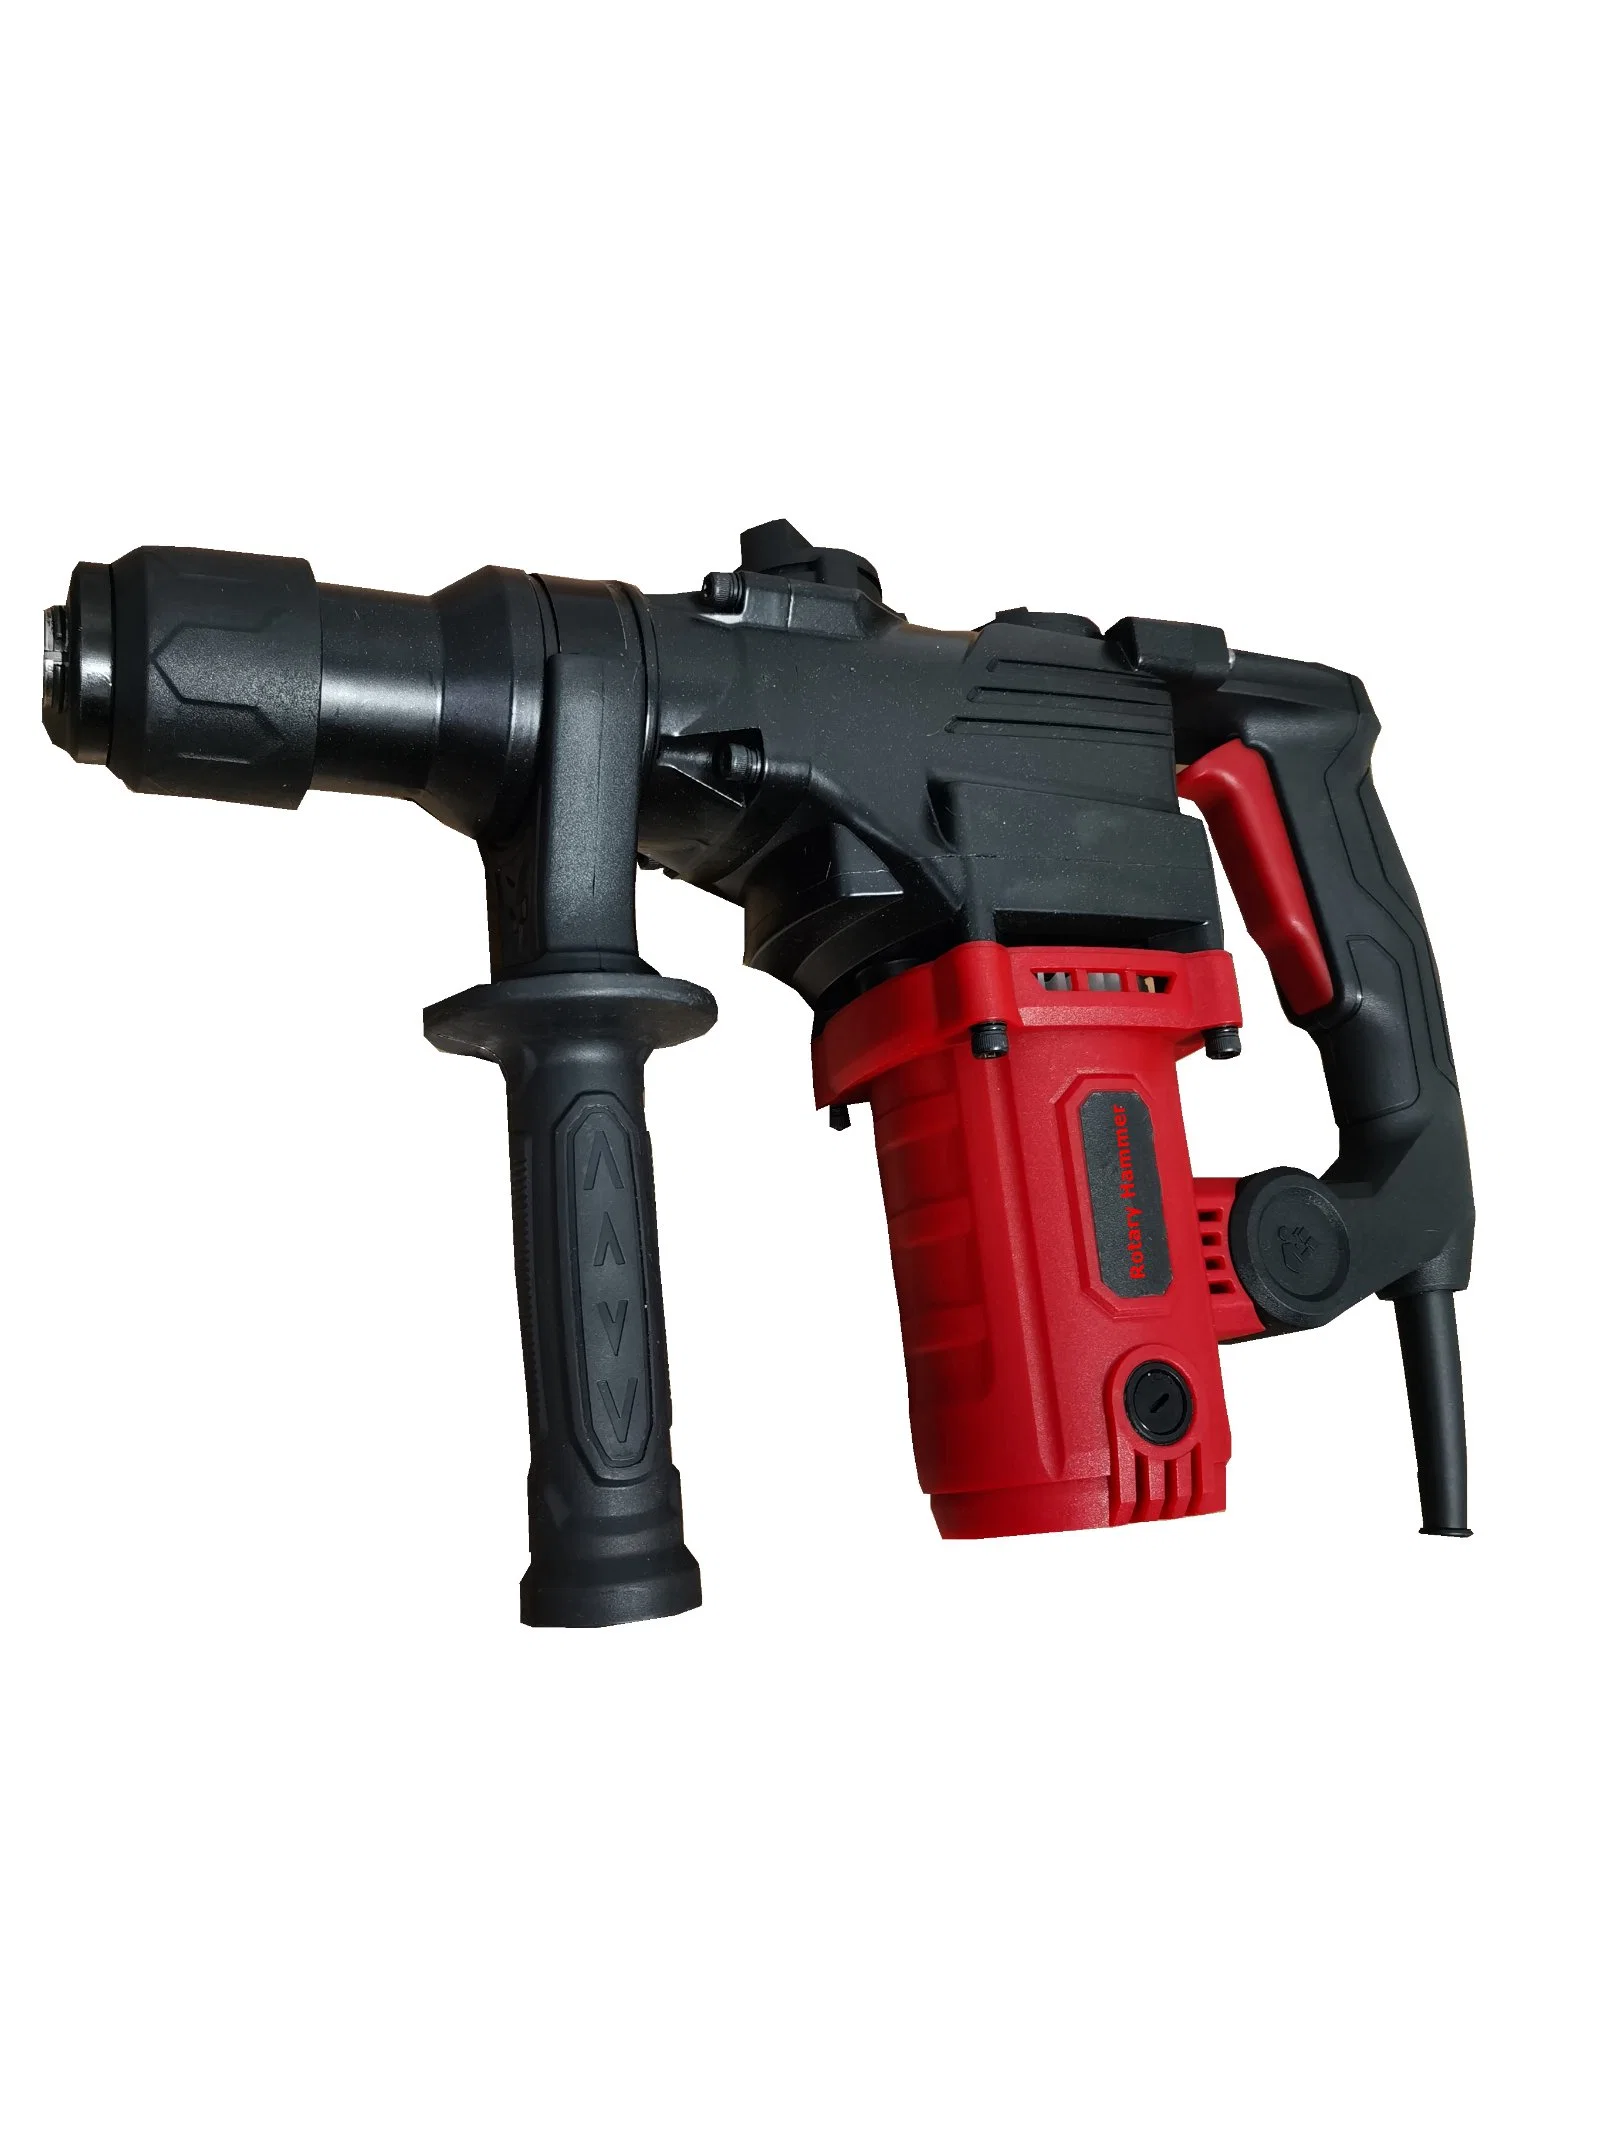 China Manufacturer Produced 850W 26mm Electric Break Hammer Drill